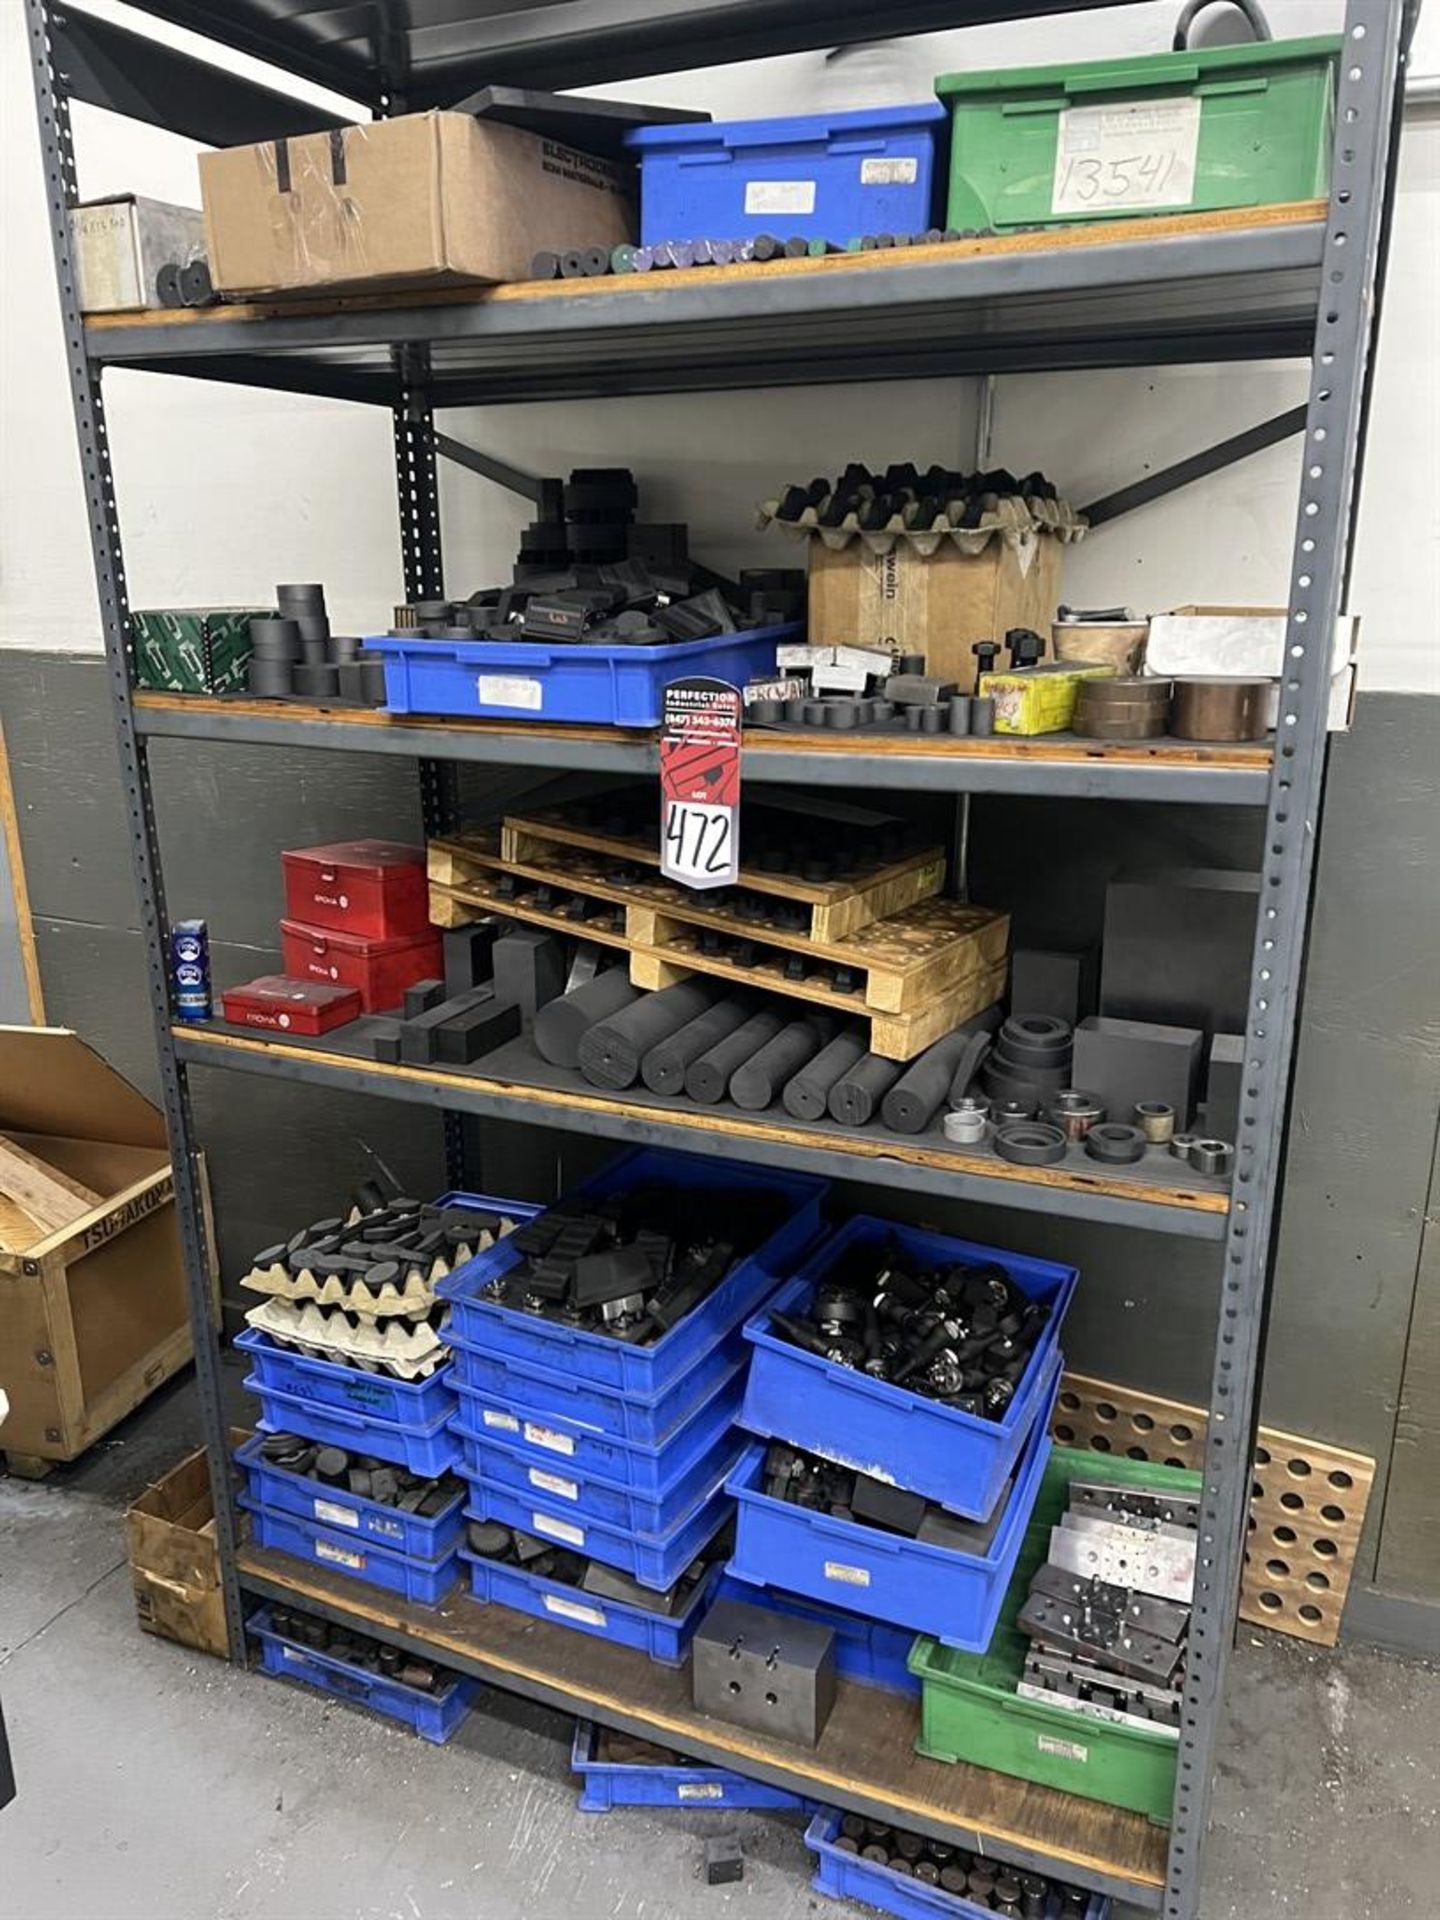 Rack of Assorted EROWA EDM Tooling, Fixtures, and Electrodes